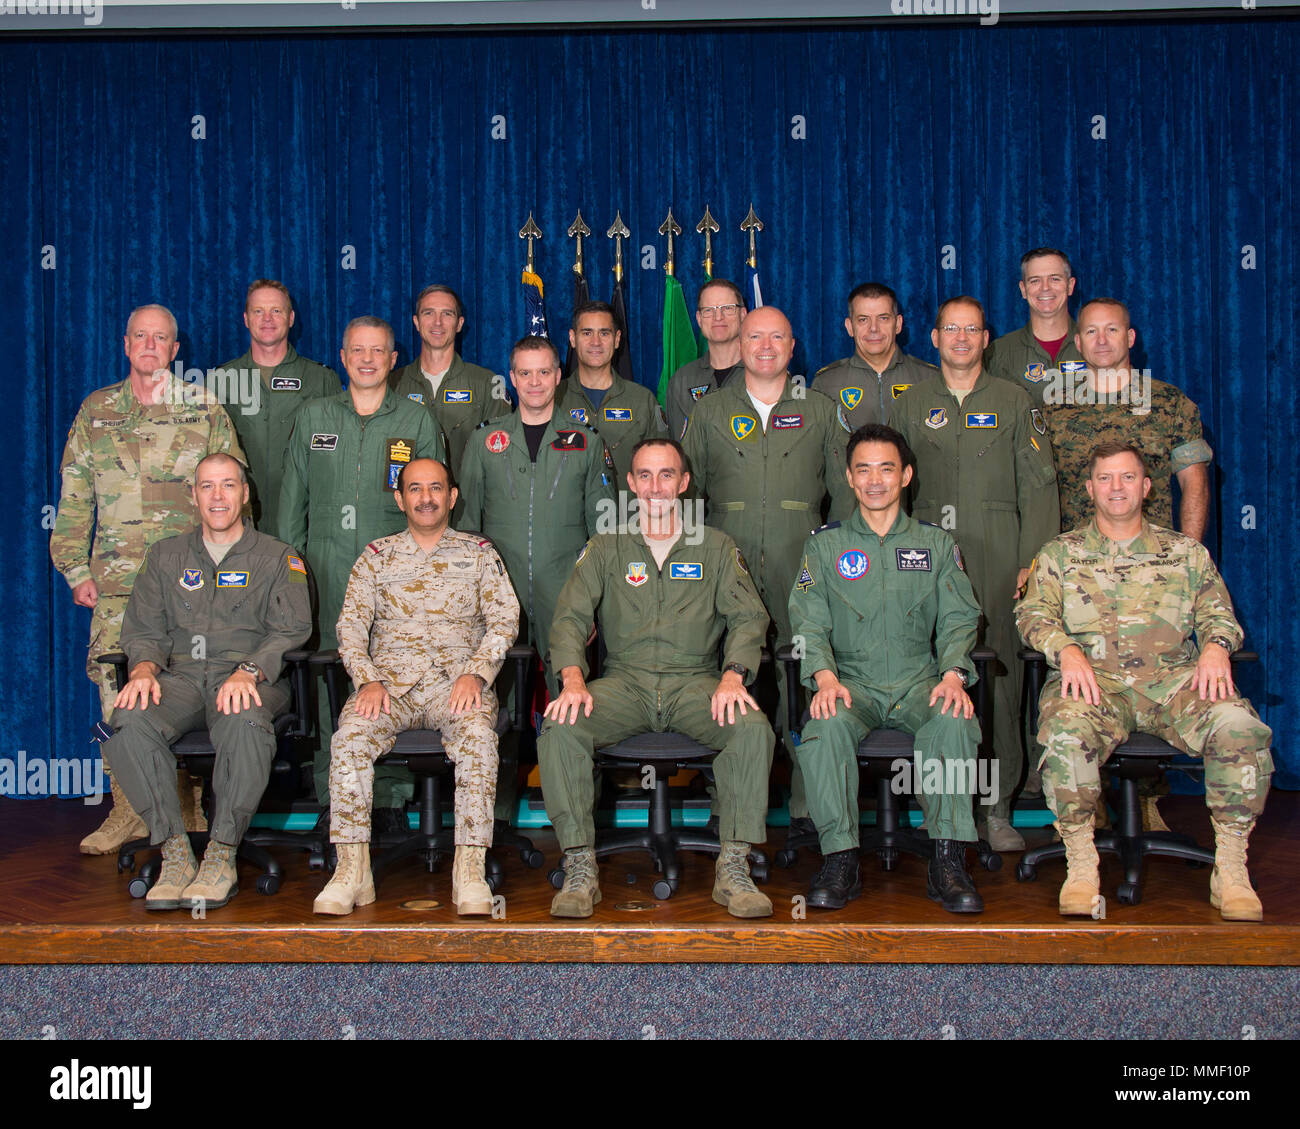 Maxwell AFB, Ala. - Group photo for the Combined Force Air Component Commanders Course 18A at the Air Force Wargaming Insitute. Pictured are as follows. First Row (L-R): Major General Thomas A. Bussiere (USAF); Major General Ahmed F. Rayzah (Royal Saudi Air Force); Major General Scott J. Zobrist (USAF); Major General Hui-Chien Liu (Taiwan Air Force); Major General William K. Gayler (US Army). Second Row (L-R): Brigadier General Timothy J. Sheriff (USARNG); Major General Antonio R. Conserva (Italian Air Force); Air Commodore Justin S. Reuter (Royal Air Force); Major General Thierry Dupont (Belg Stock Photo